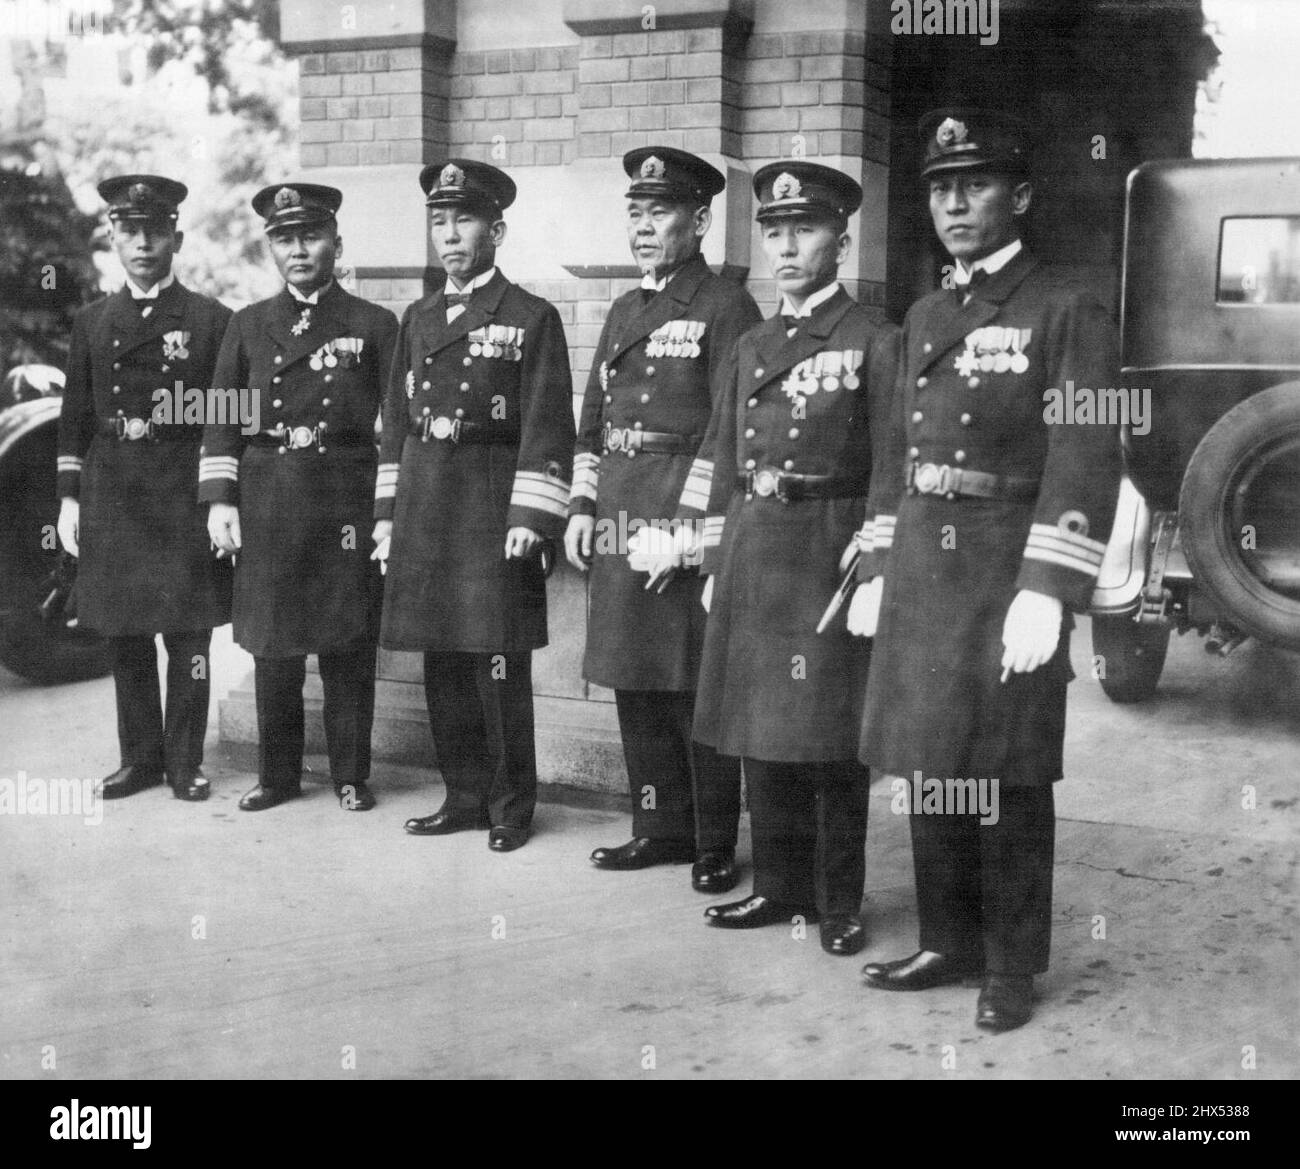 His Majesty the Emperor entertained the Japanese Naval representatives for the coming Disarmament conference in the Imperial Palace. The third from right, is Vice-Admiral Nagano, chief of the naval representative with his suits pictured at the Naval Ministry. December 5, 1932. Stock Photo